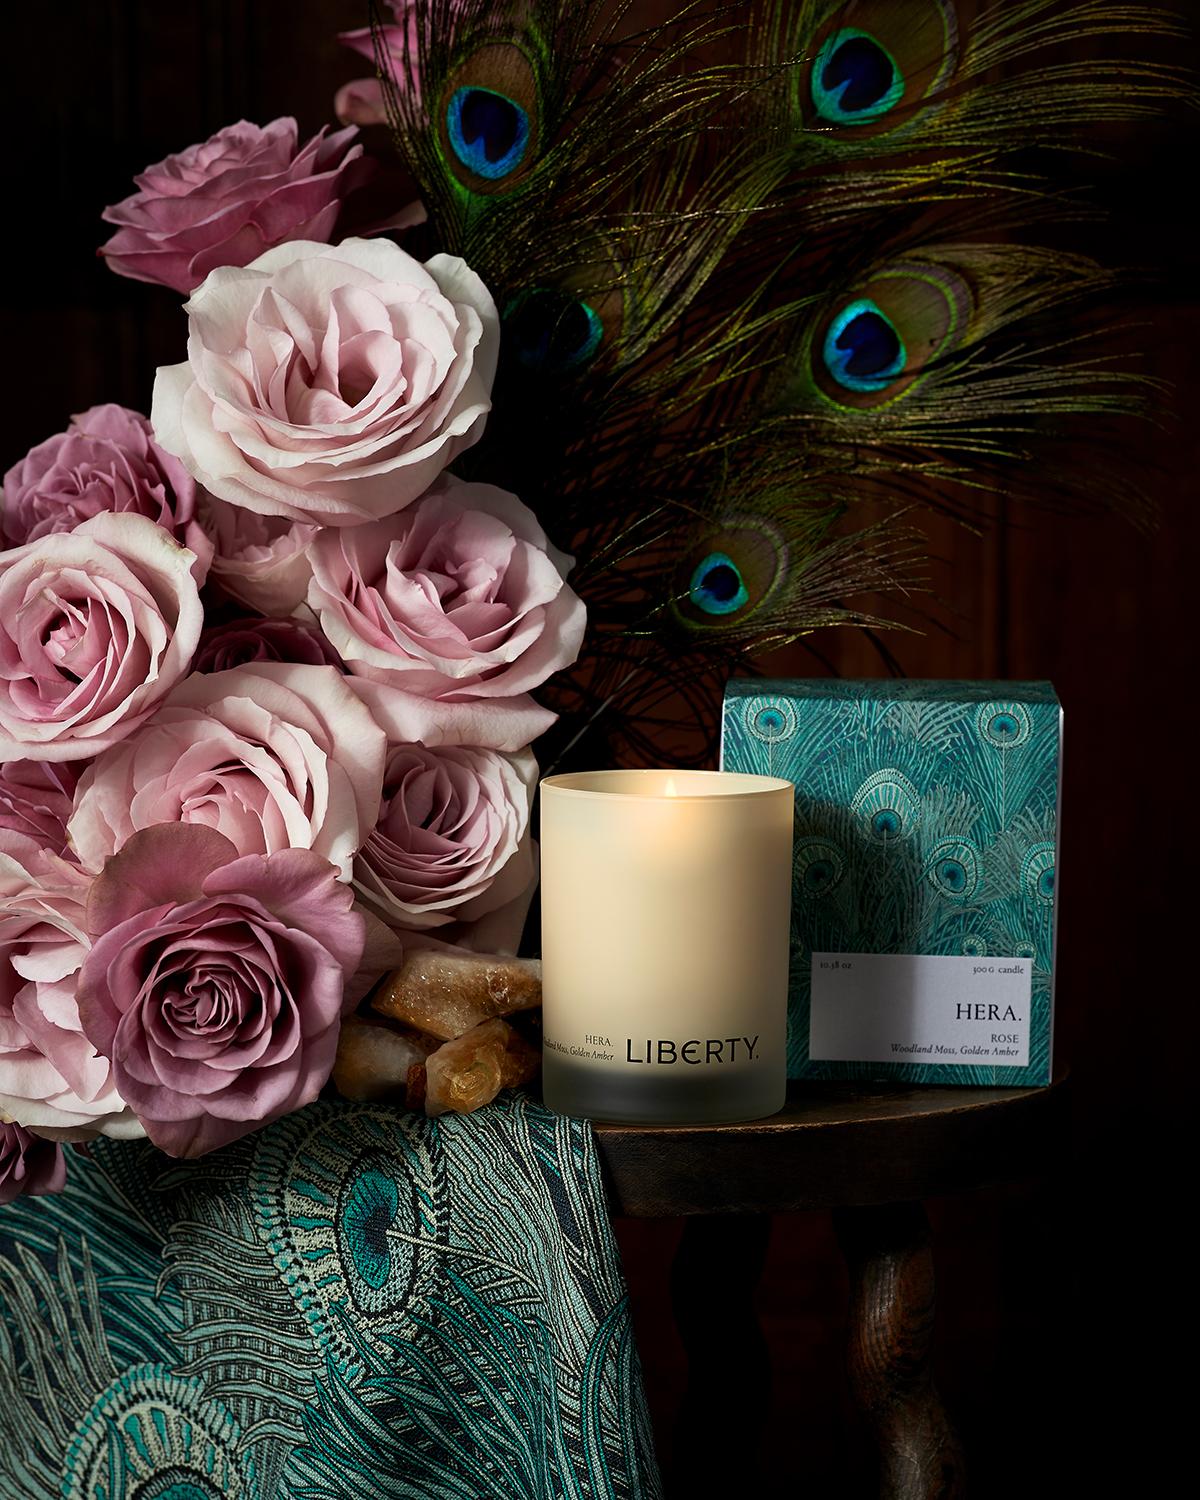 The Smell of Liberty Print: Liberty Scented Candles